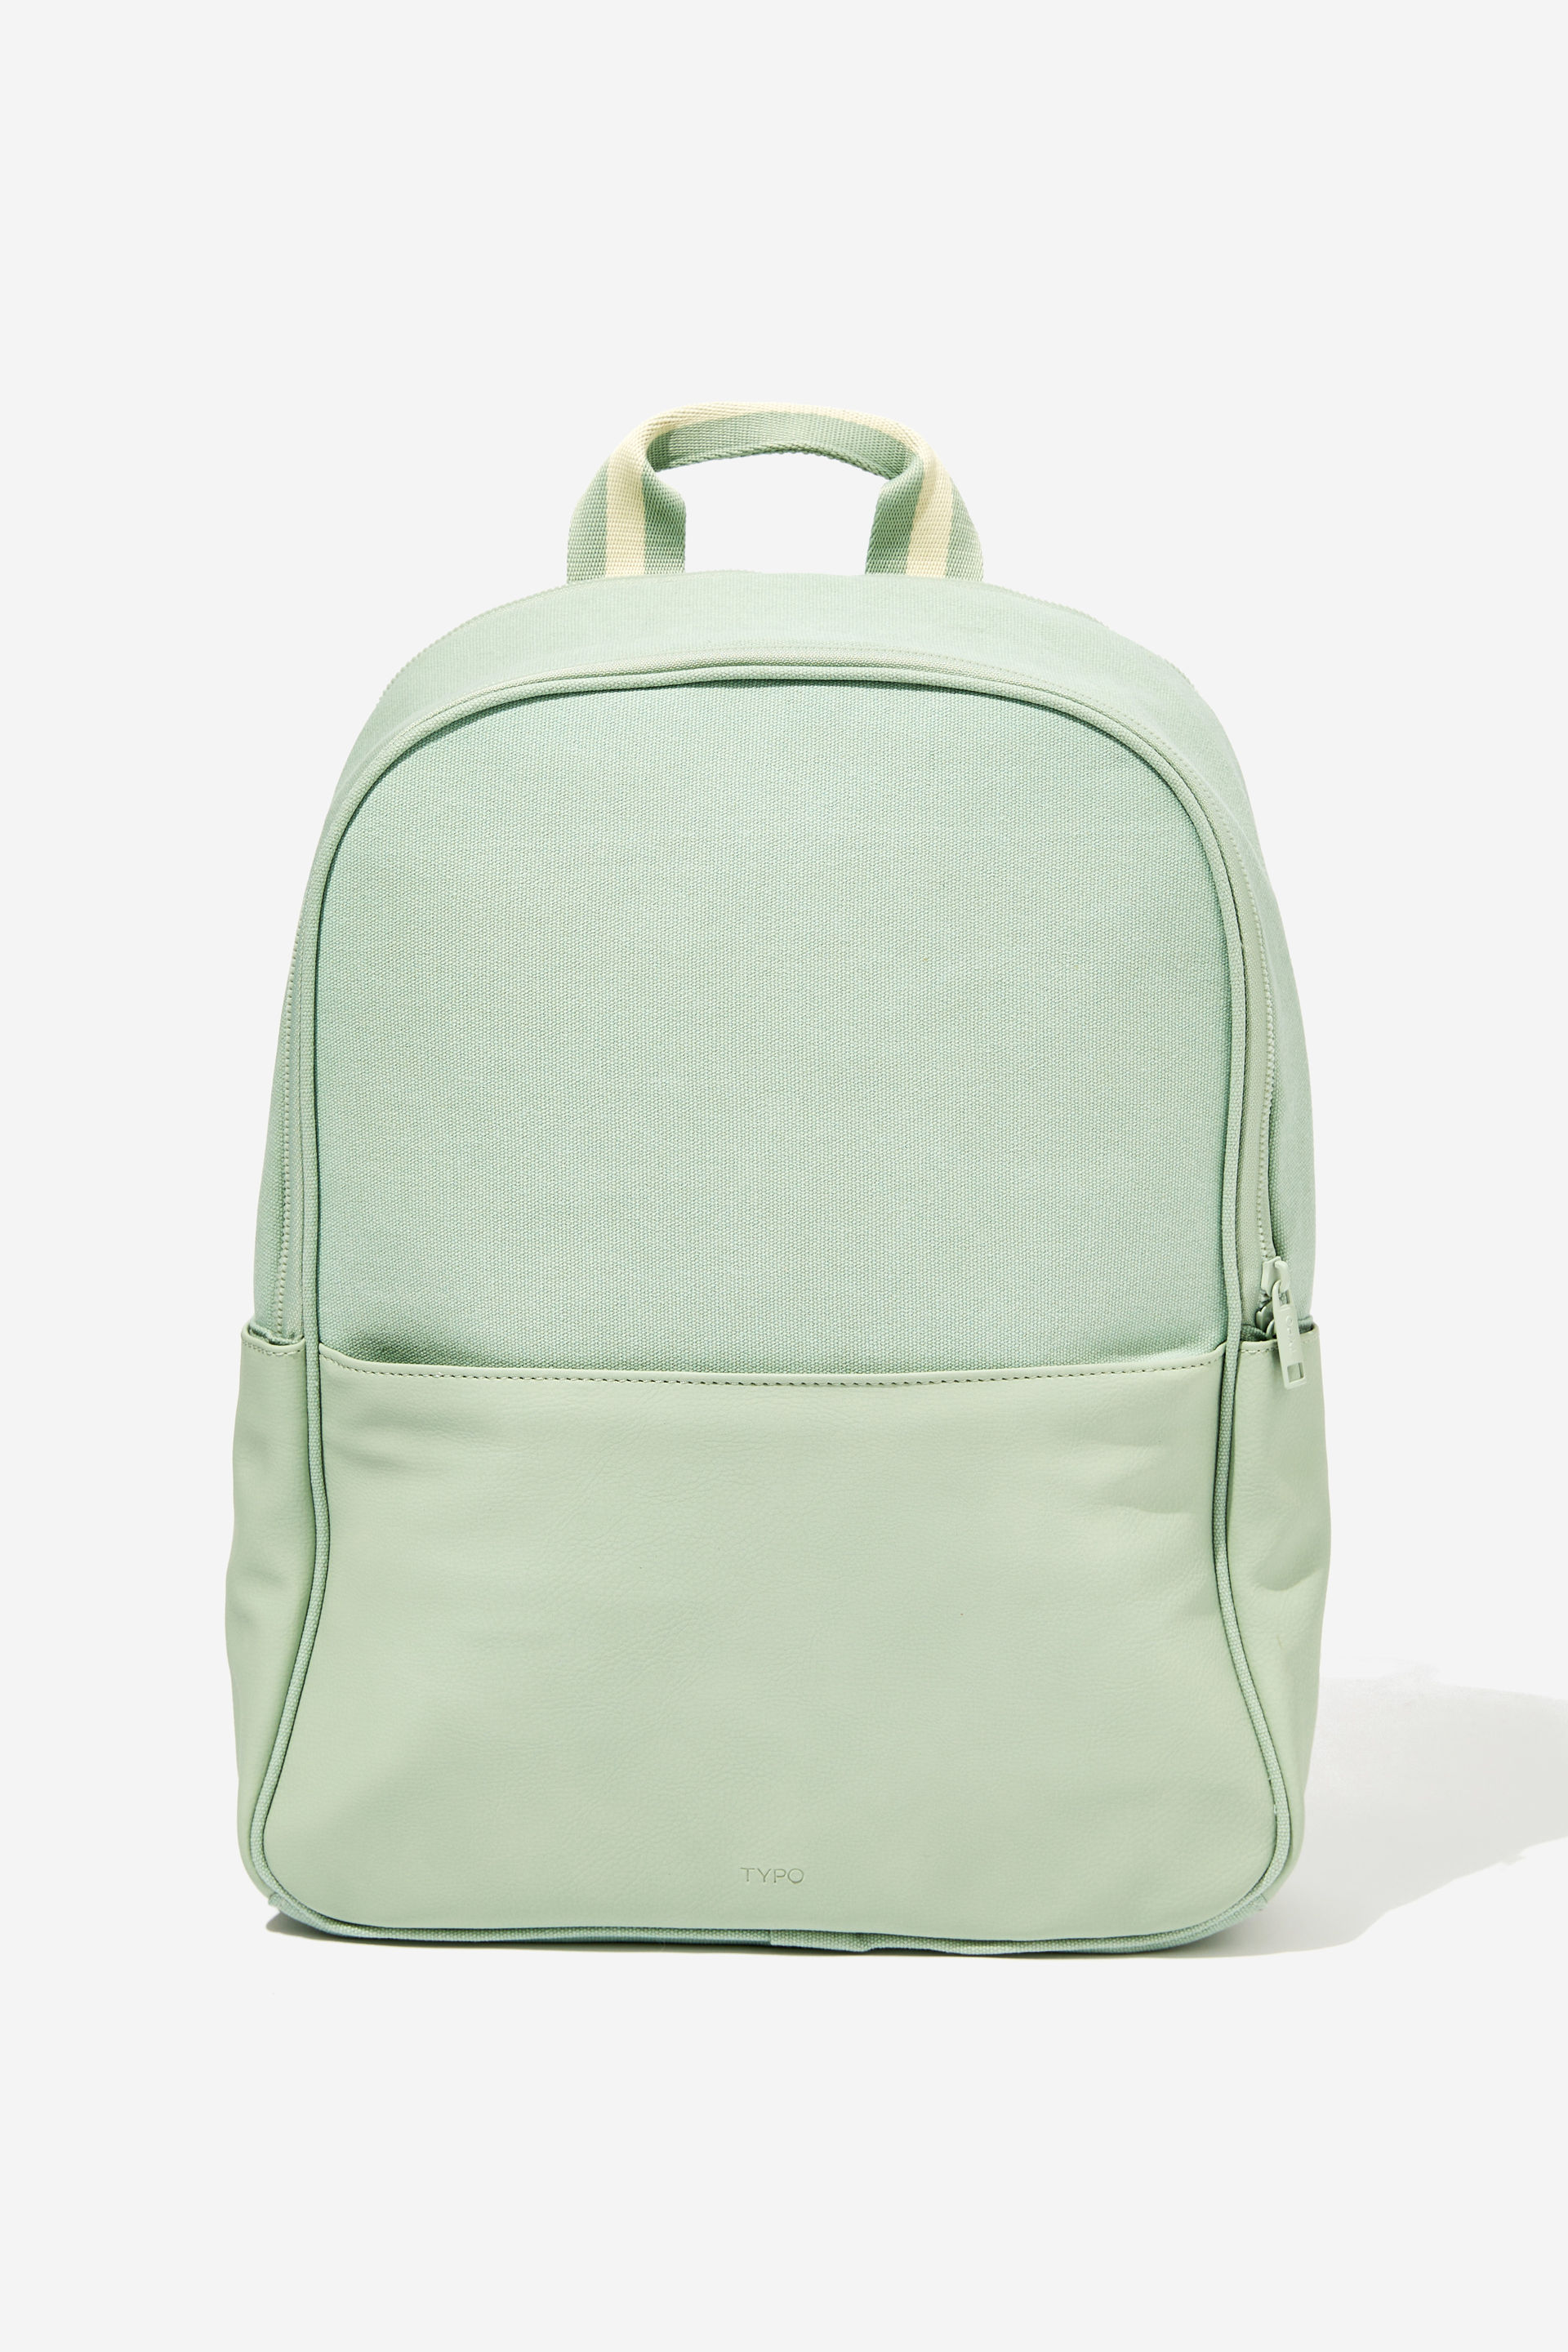 Typo - Essential Commuter Backpack - Smoke green